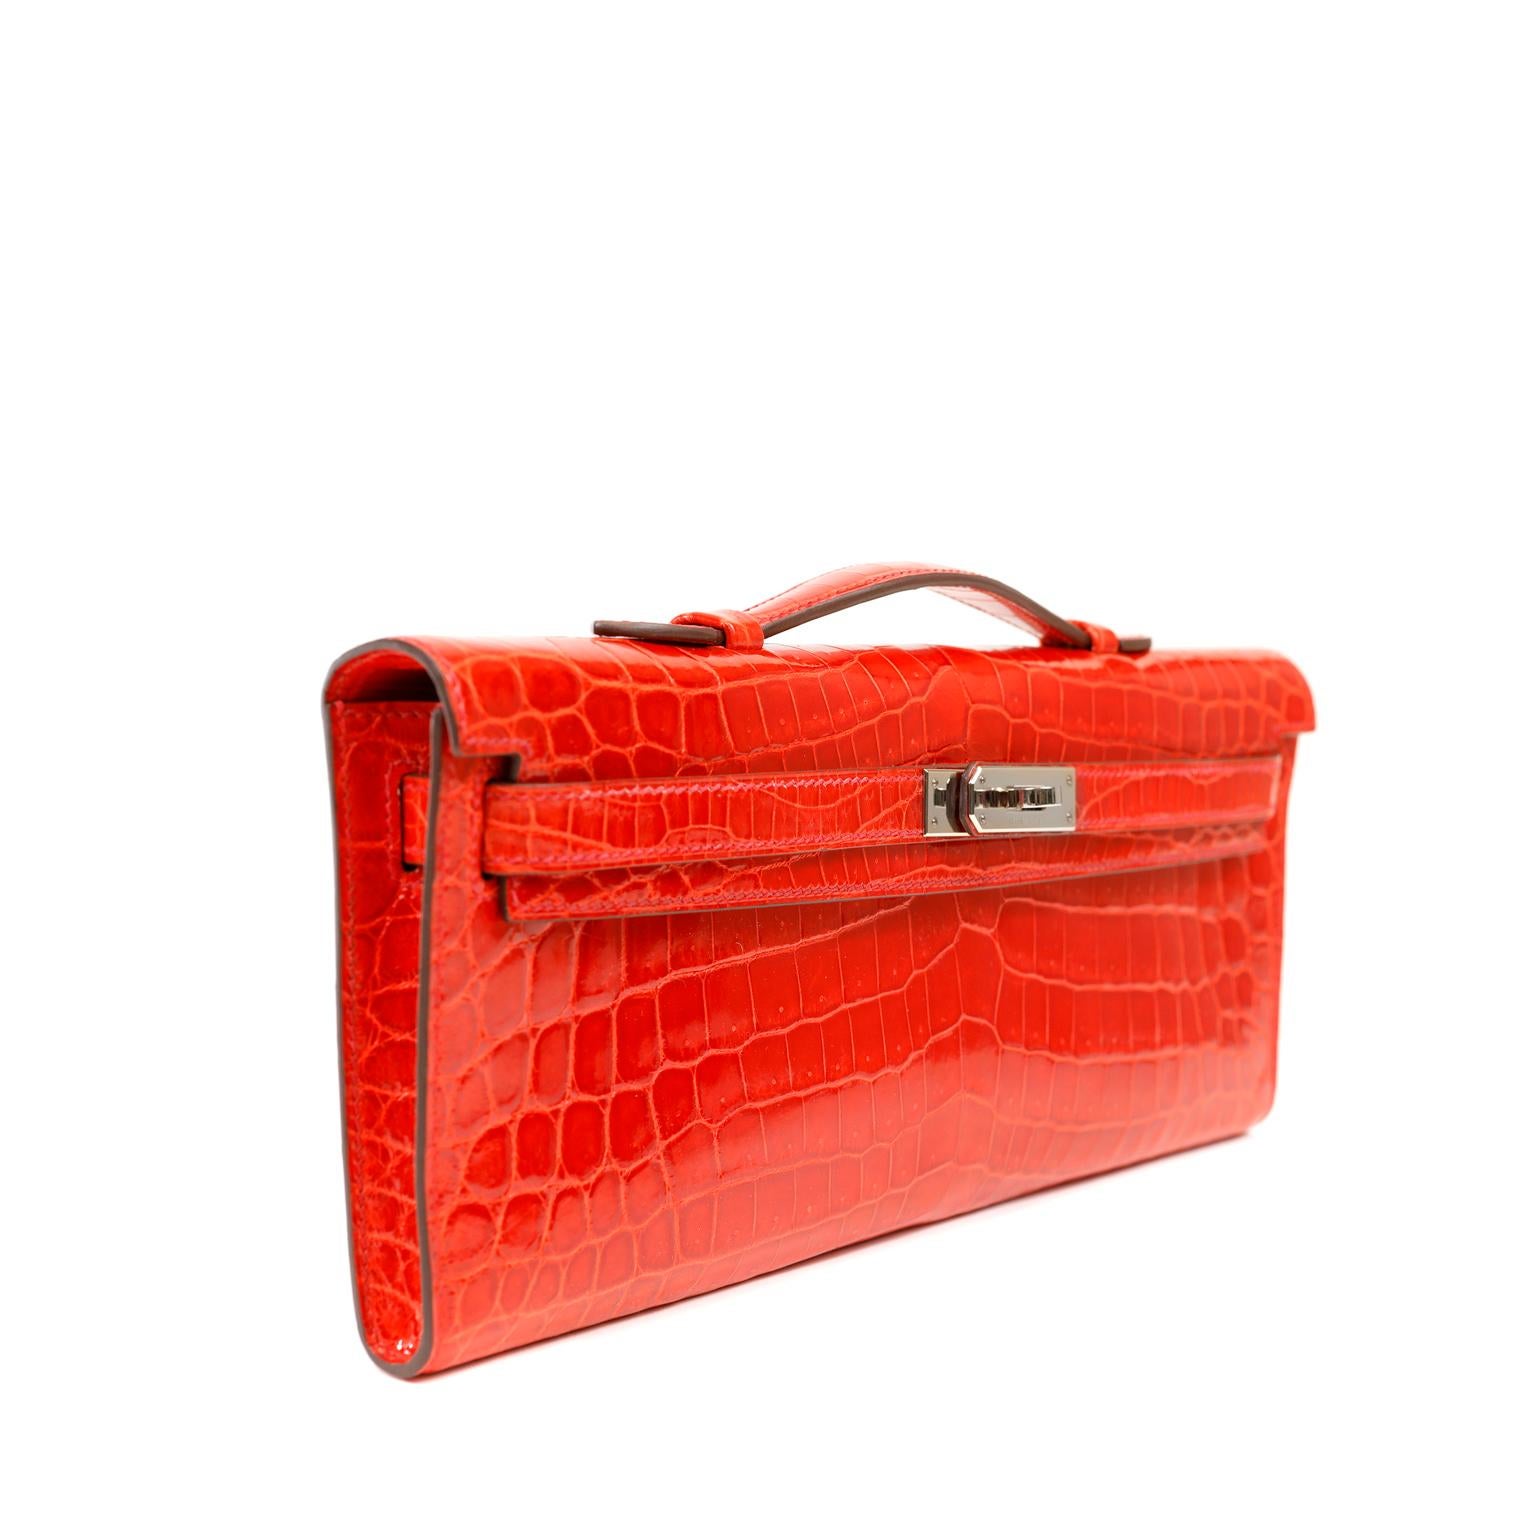 Hermes Kelly Cut Bag Braise Crocodile Gold Hardware Exquisite Lipstick Red  For Sale at 1stDibs